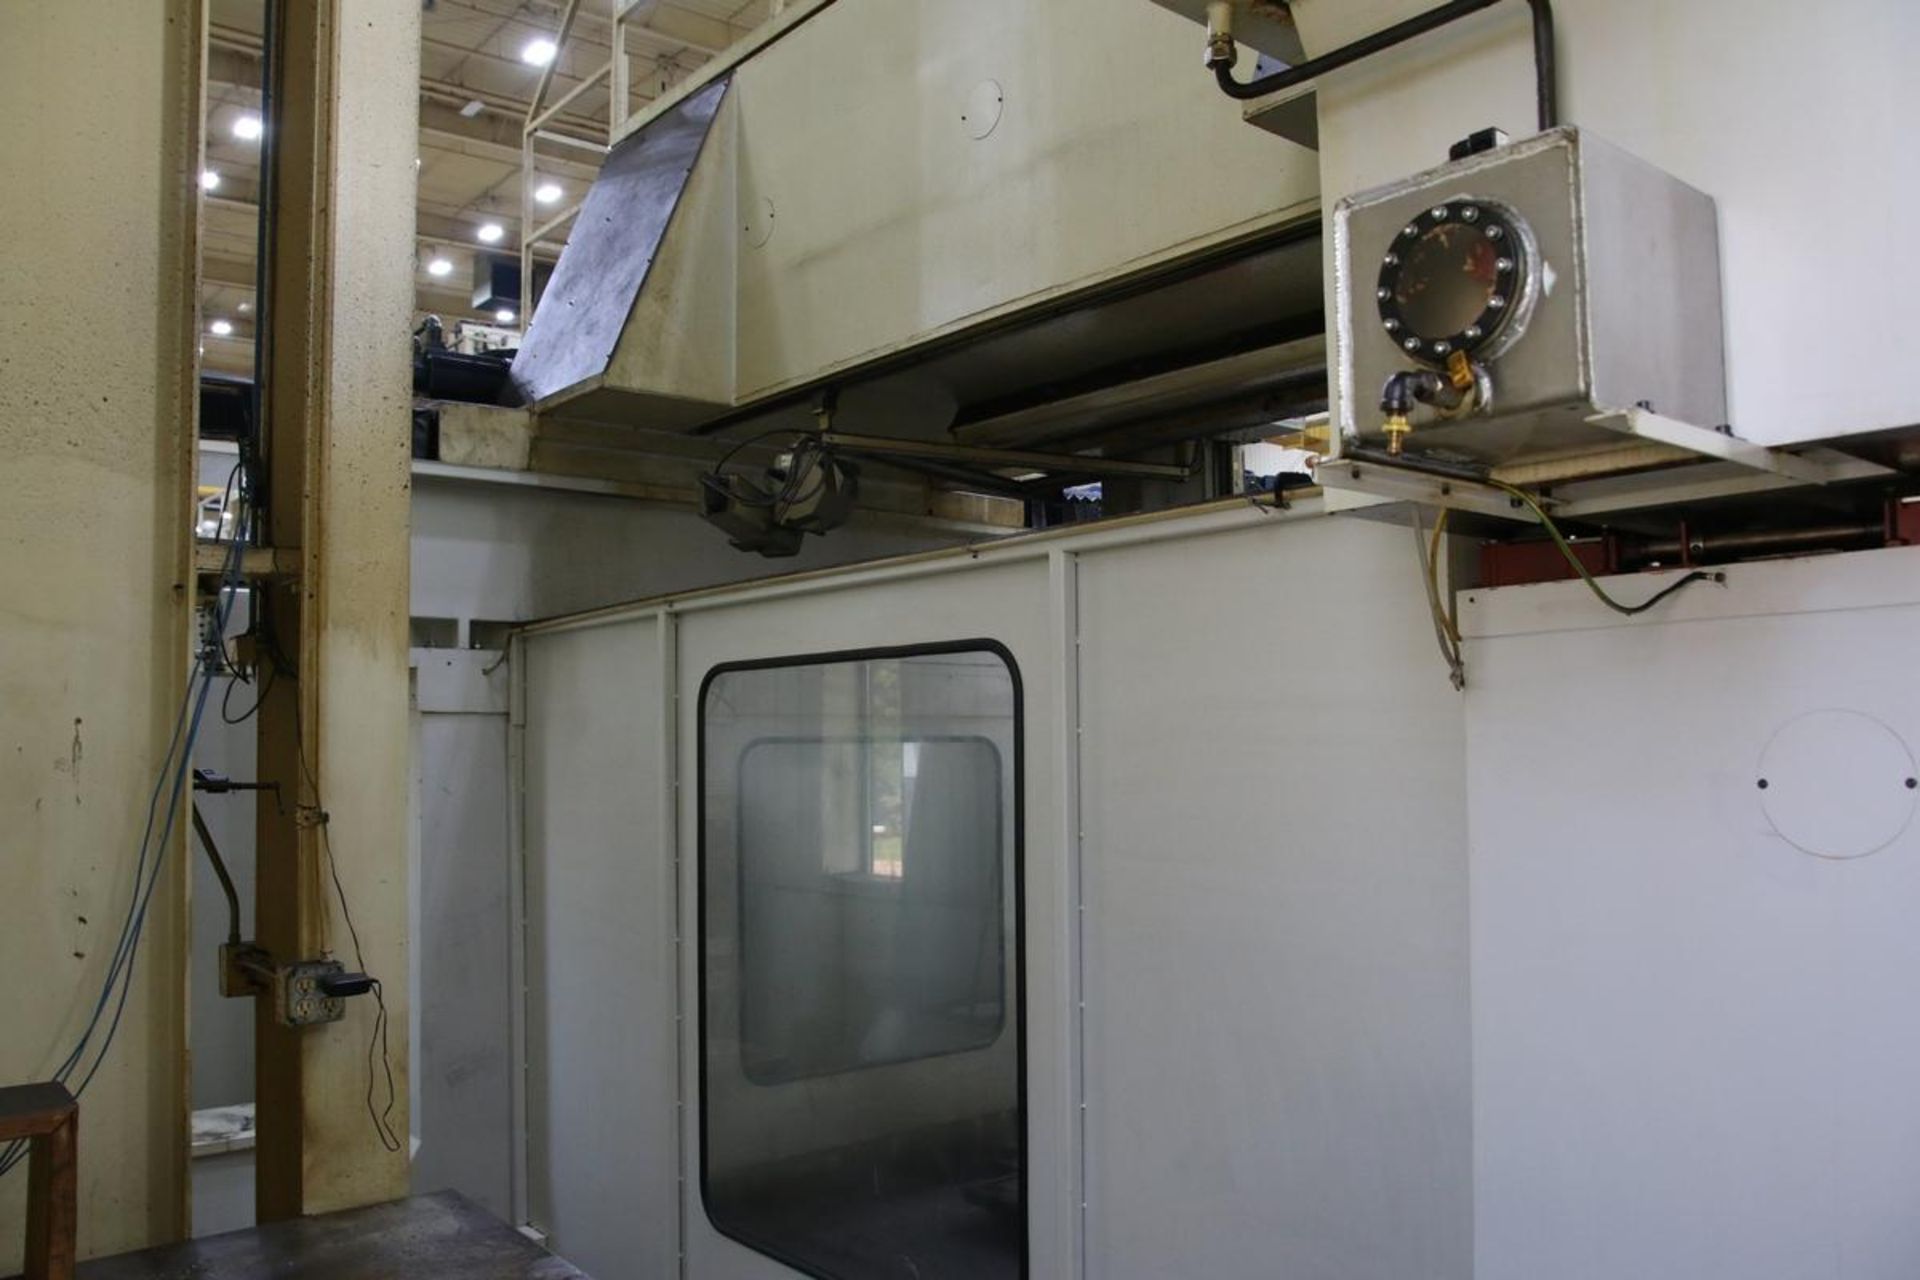 1995 Droop & Rein FOG 2500 HS11/13NW 5-Axis CNC High Speed Gantry Mill - Image 4 of 32